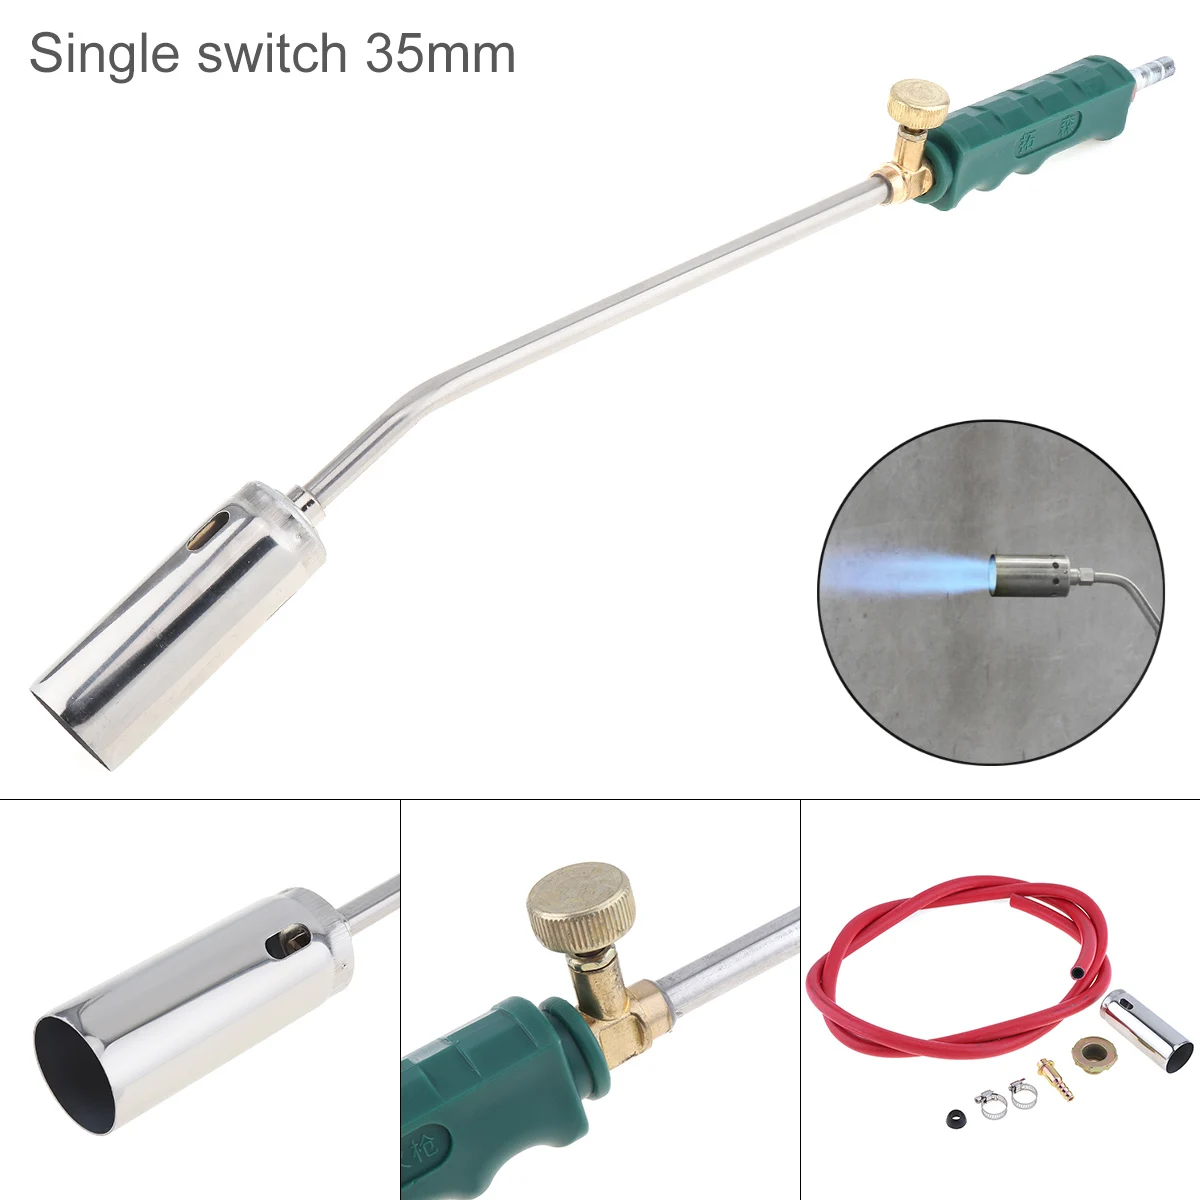 Single Switch Type Liquefied Gas Torch Welding Spitfire-Gun Support Oxygen Acetylene Propane for Barbecue / Hair Removal